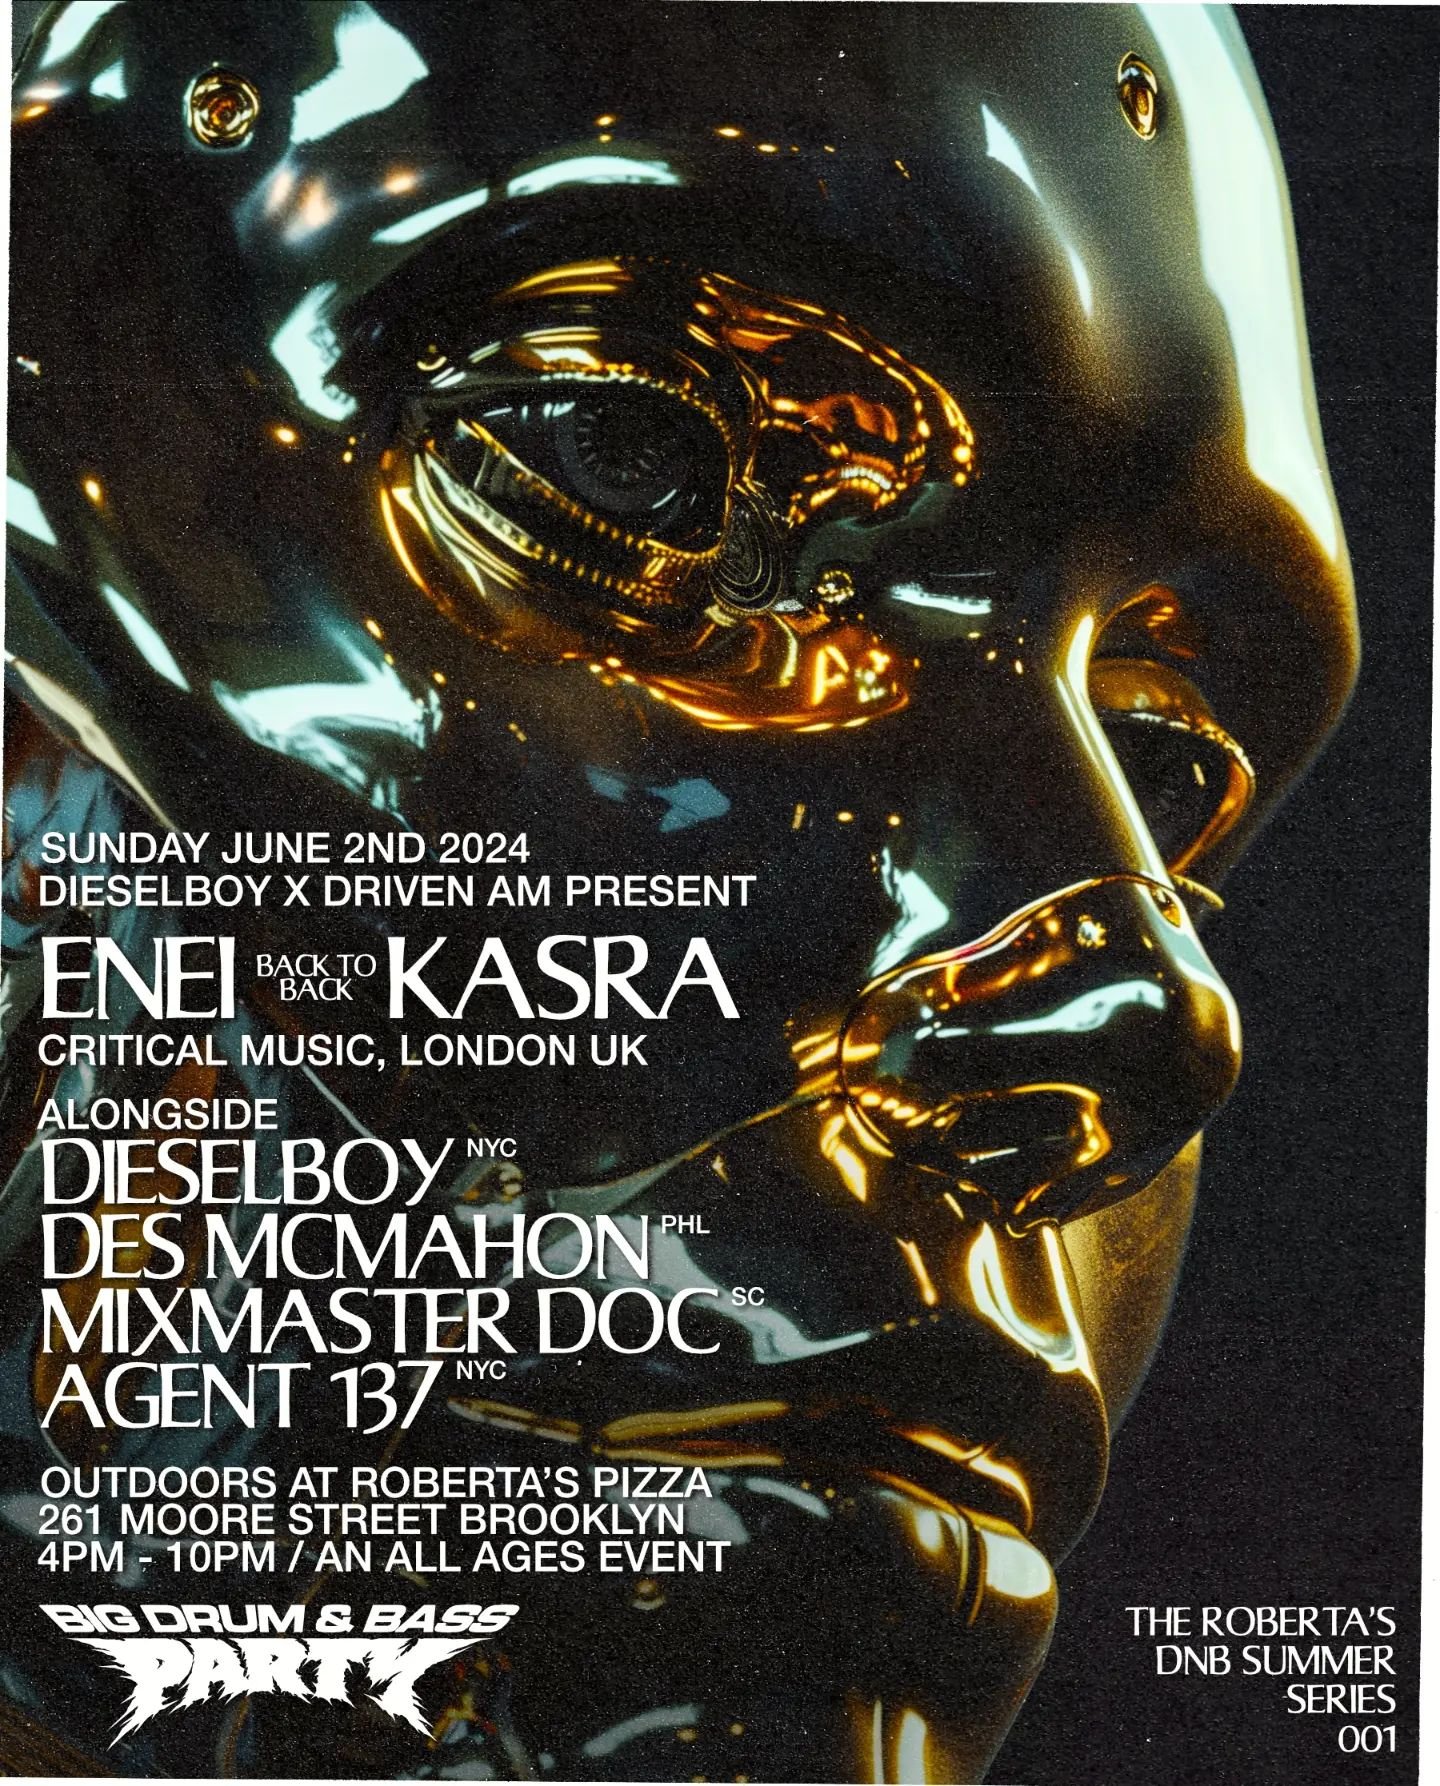 Next up! The first in our annual daytime outdoor Summer series at @robertaspizza !
@eneimusique @kasracritical @dieselboy @desmcmahon @mixmasterdoc @agent137_ 
Pizza. DnB on a Void Sound System and those legendary Driven AM vibes.
See you June 2nd!
T